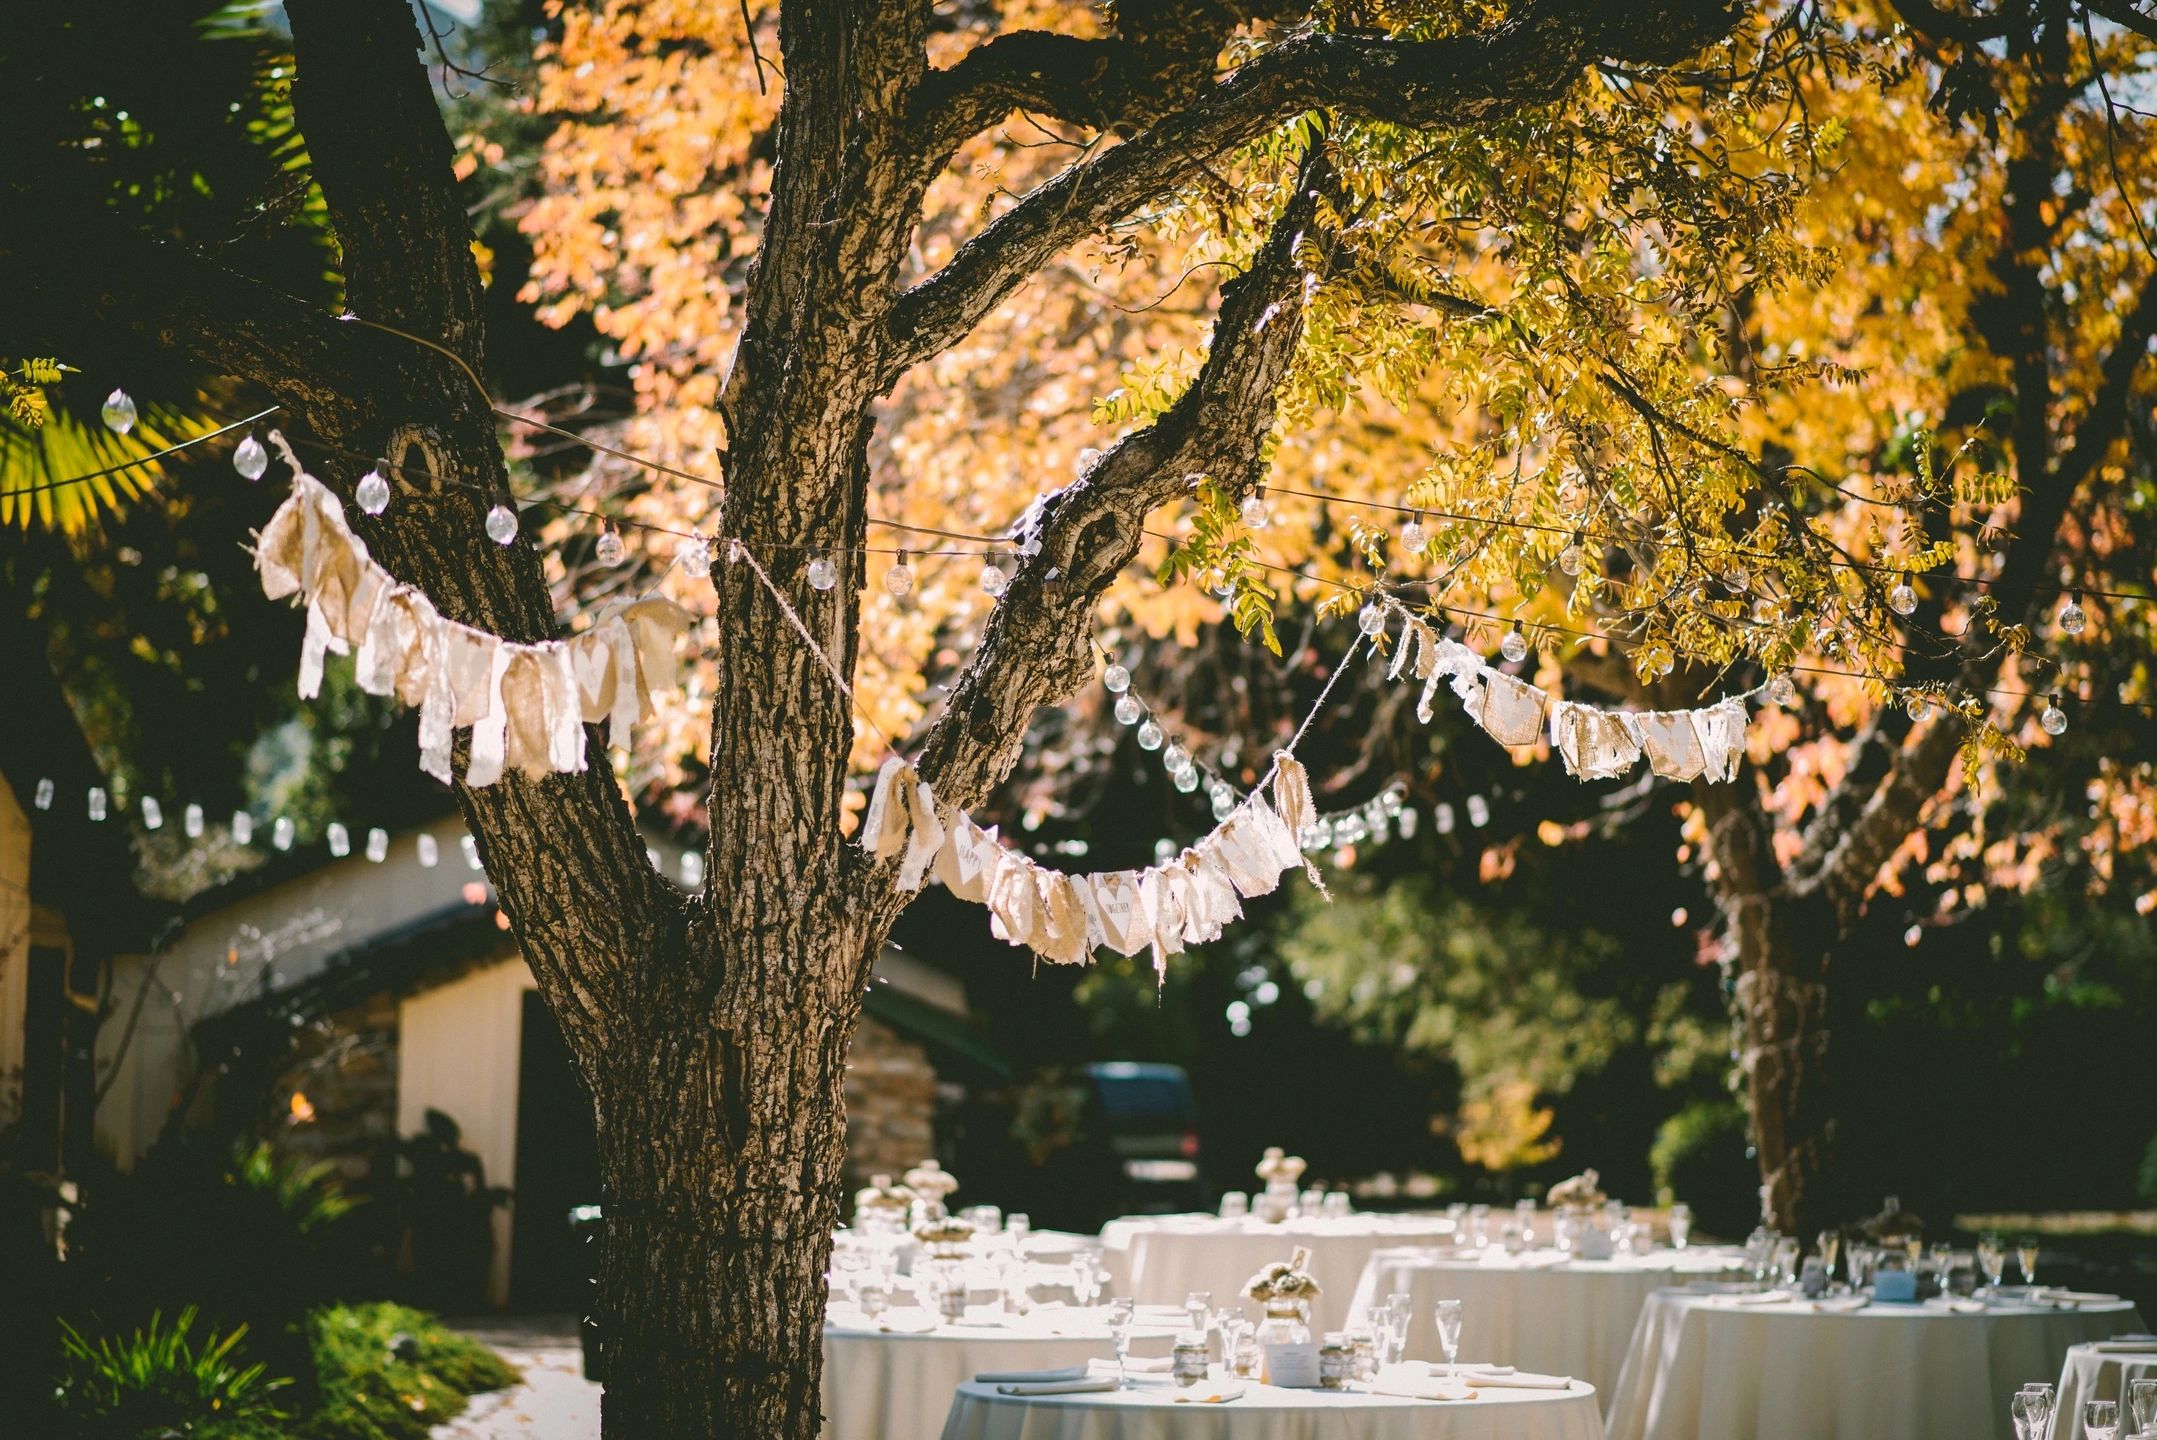 Outdoor wedding venues can be a nice change of pace.